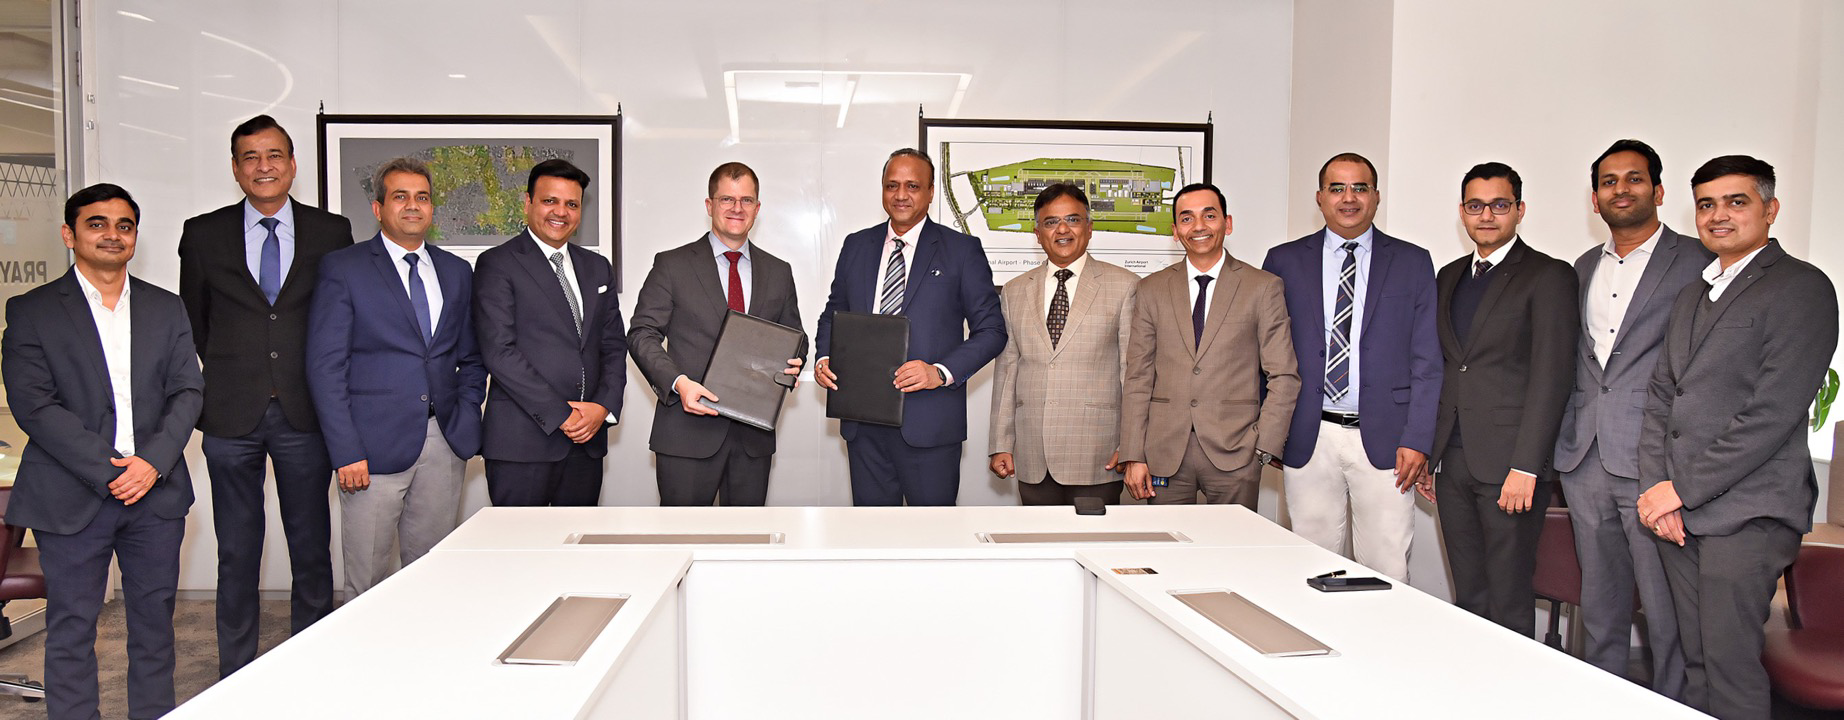 AISATS and YIAPL have recently entered into a concession agreement to construct a comprehensive multi-modal cargo hub at Noida International Airport